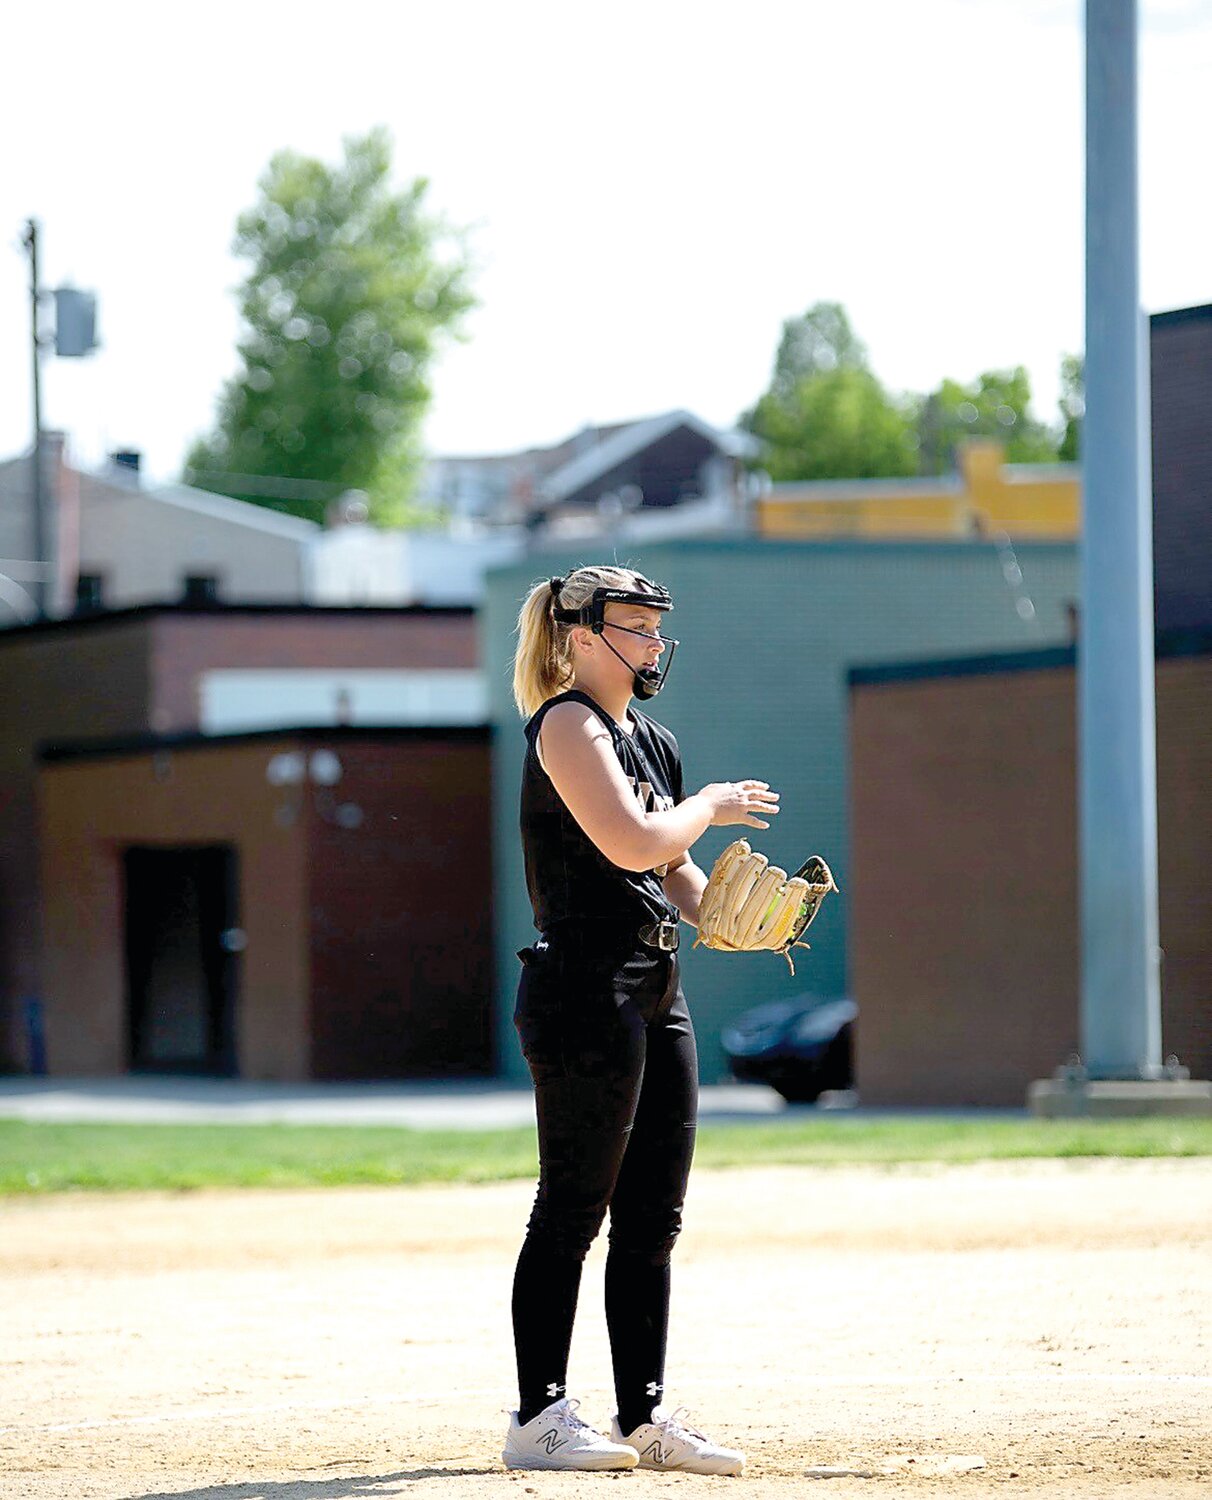 In her senior year Archbishop Wood’s Dakota Fanelli earned the Philadelphia Catholic League’s Most Valuable Player and Pitcher of the Year accolades.